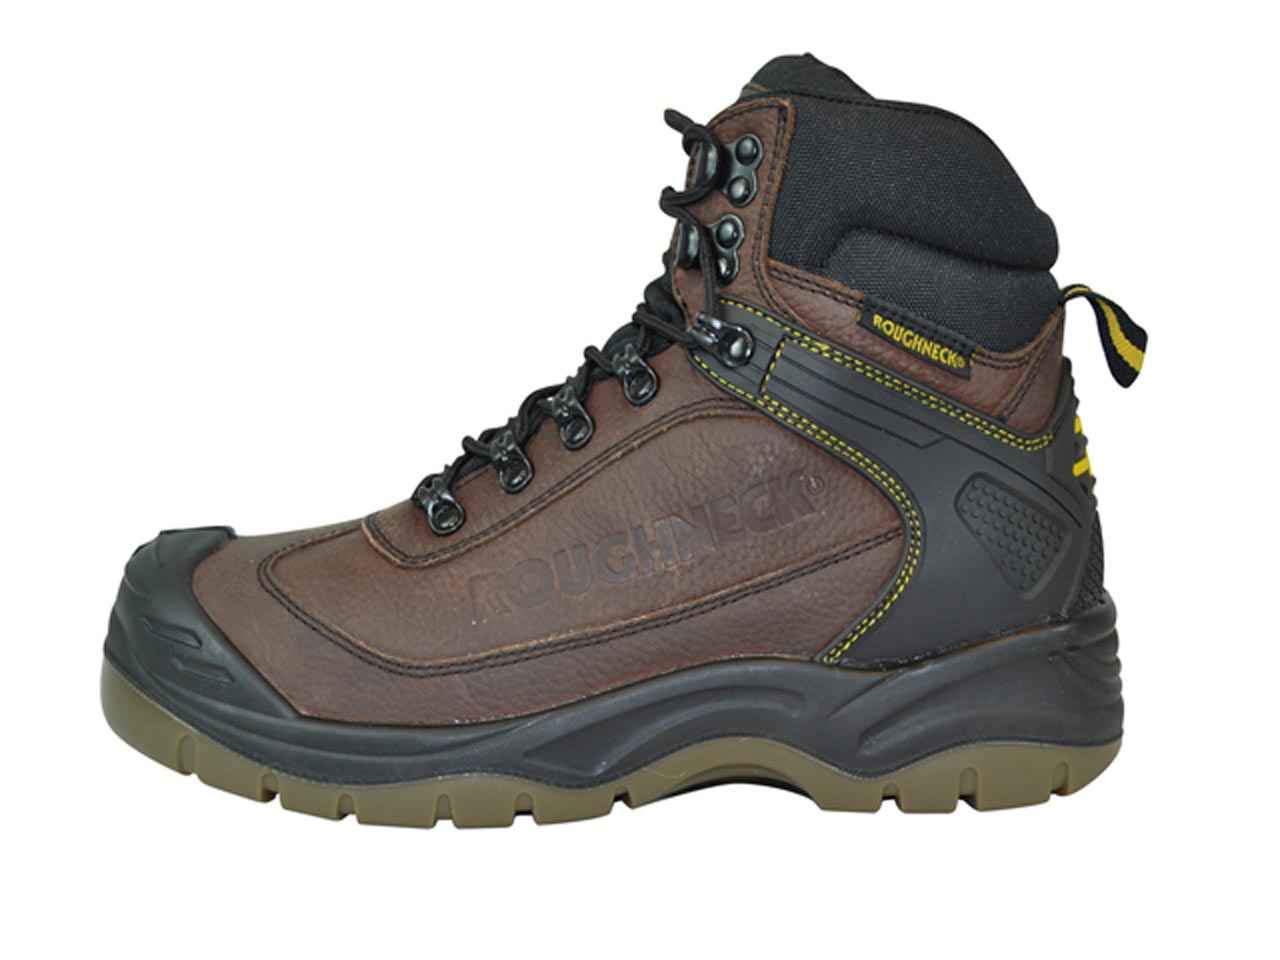 Roughneck RNKTEMPEST10 Tempest S3 Waterproof Hiker Boots UK 10 Euro 44